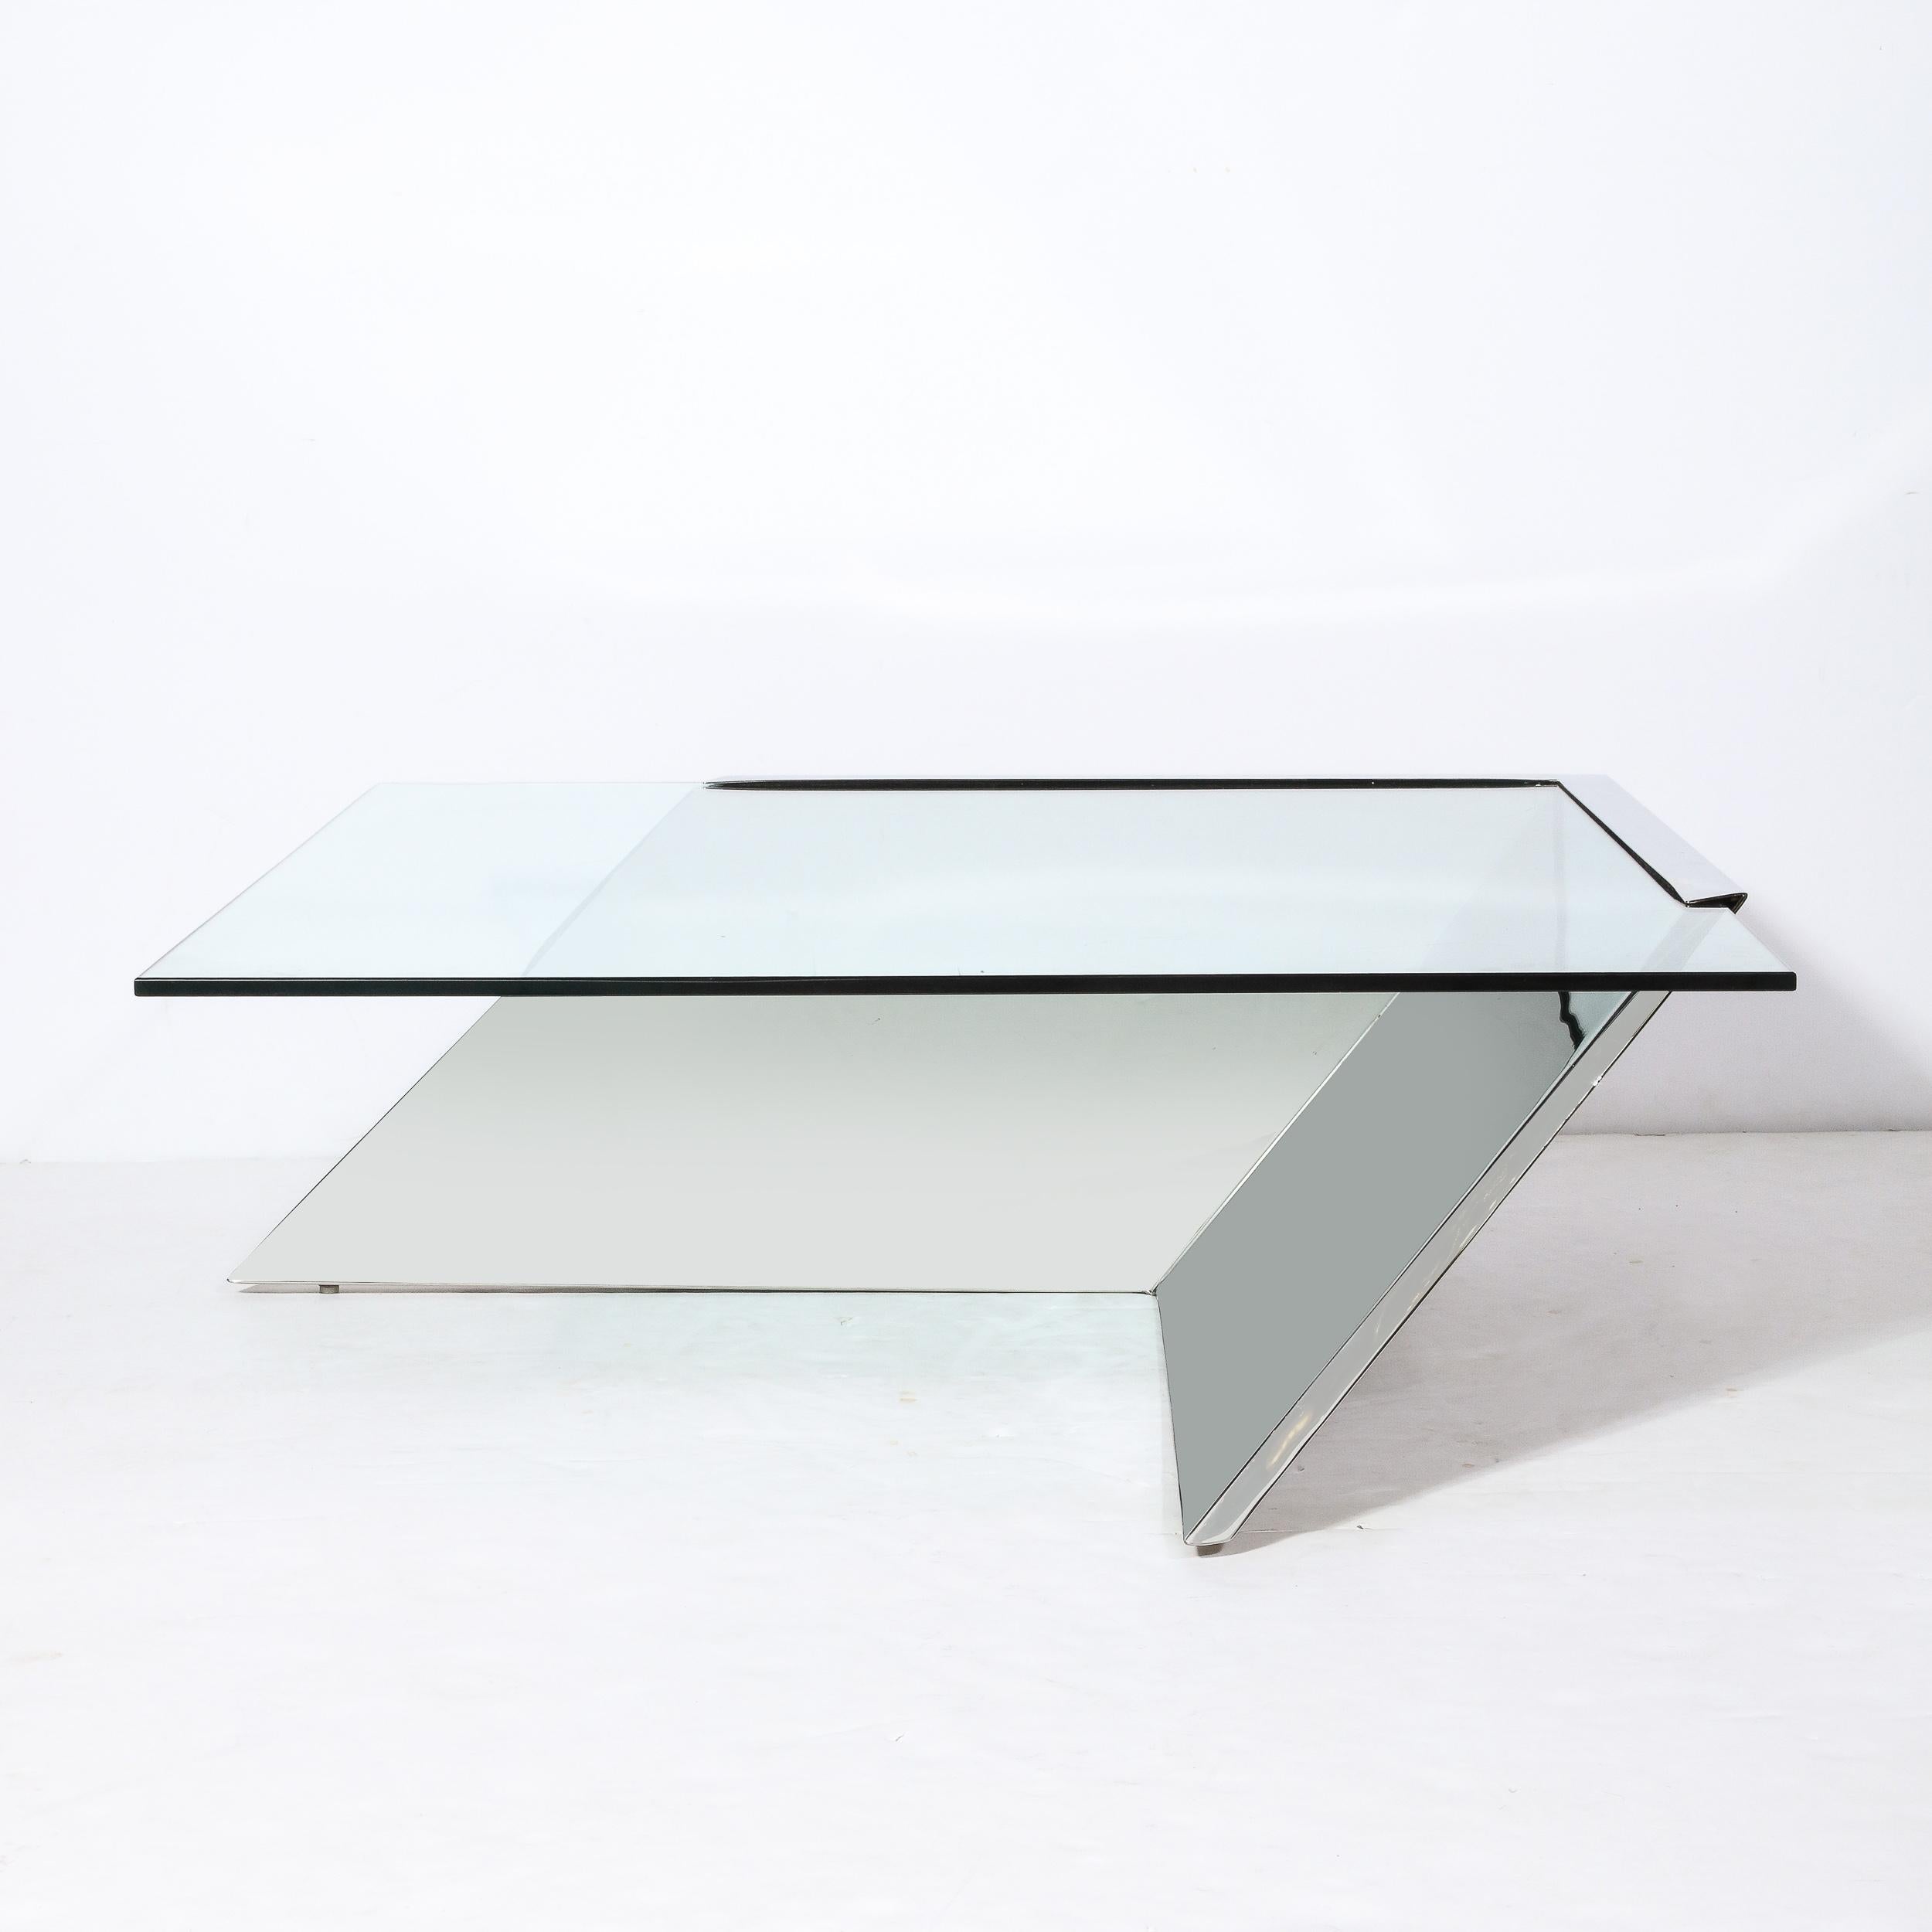 Late 20th Century Mid-Century Cantilevered Chrome & Glass Coffee Table by J. Wade Beam for Brueton For Sale